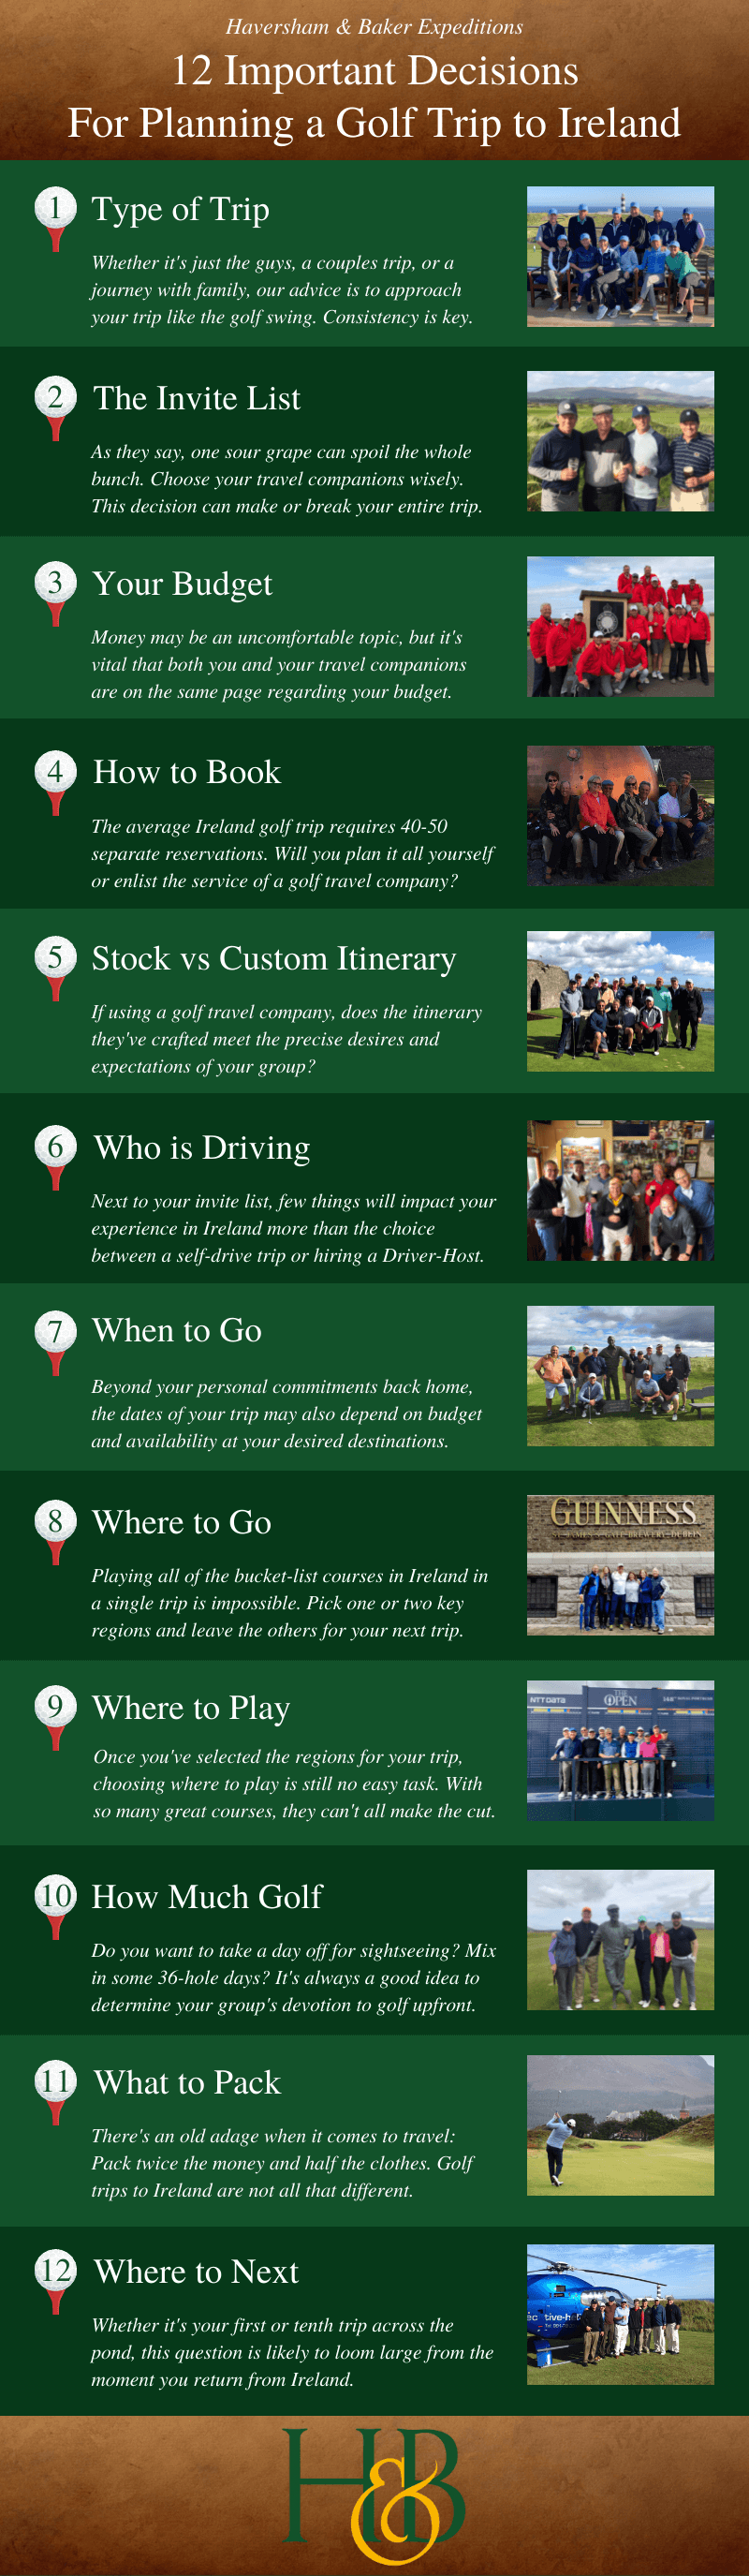 How to Plan a Golf Trip to Ireland Infographic